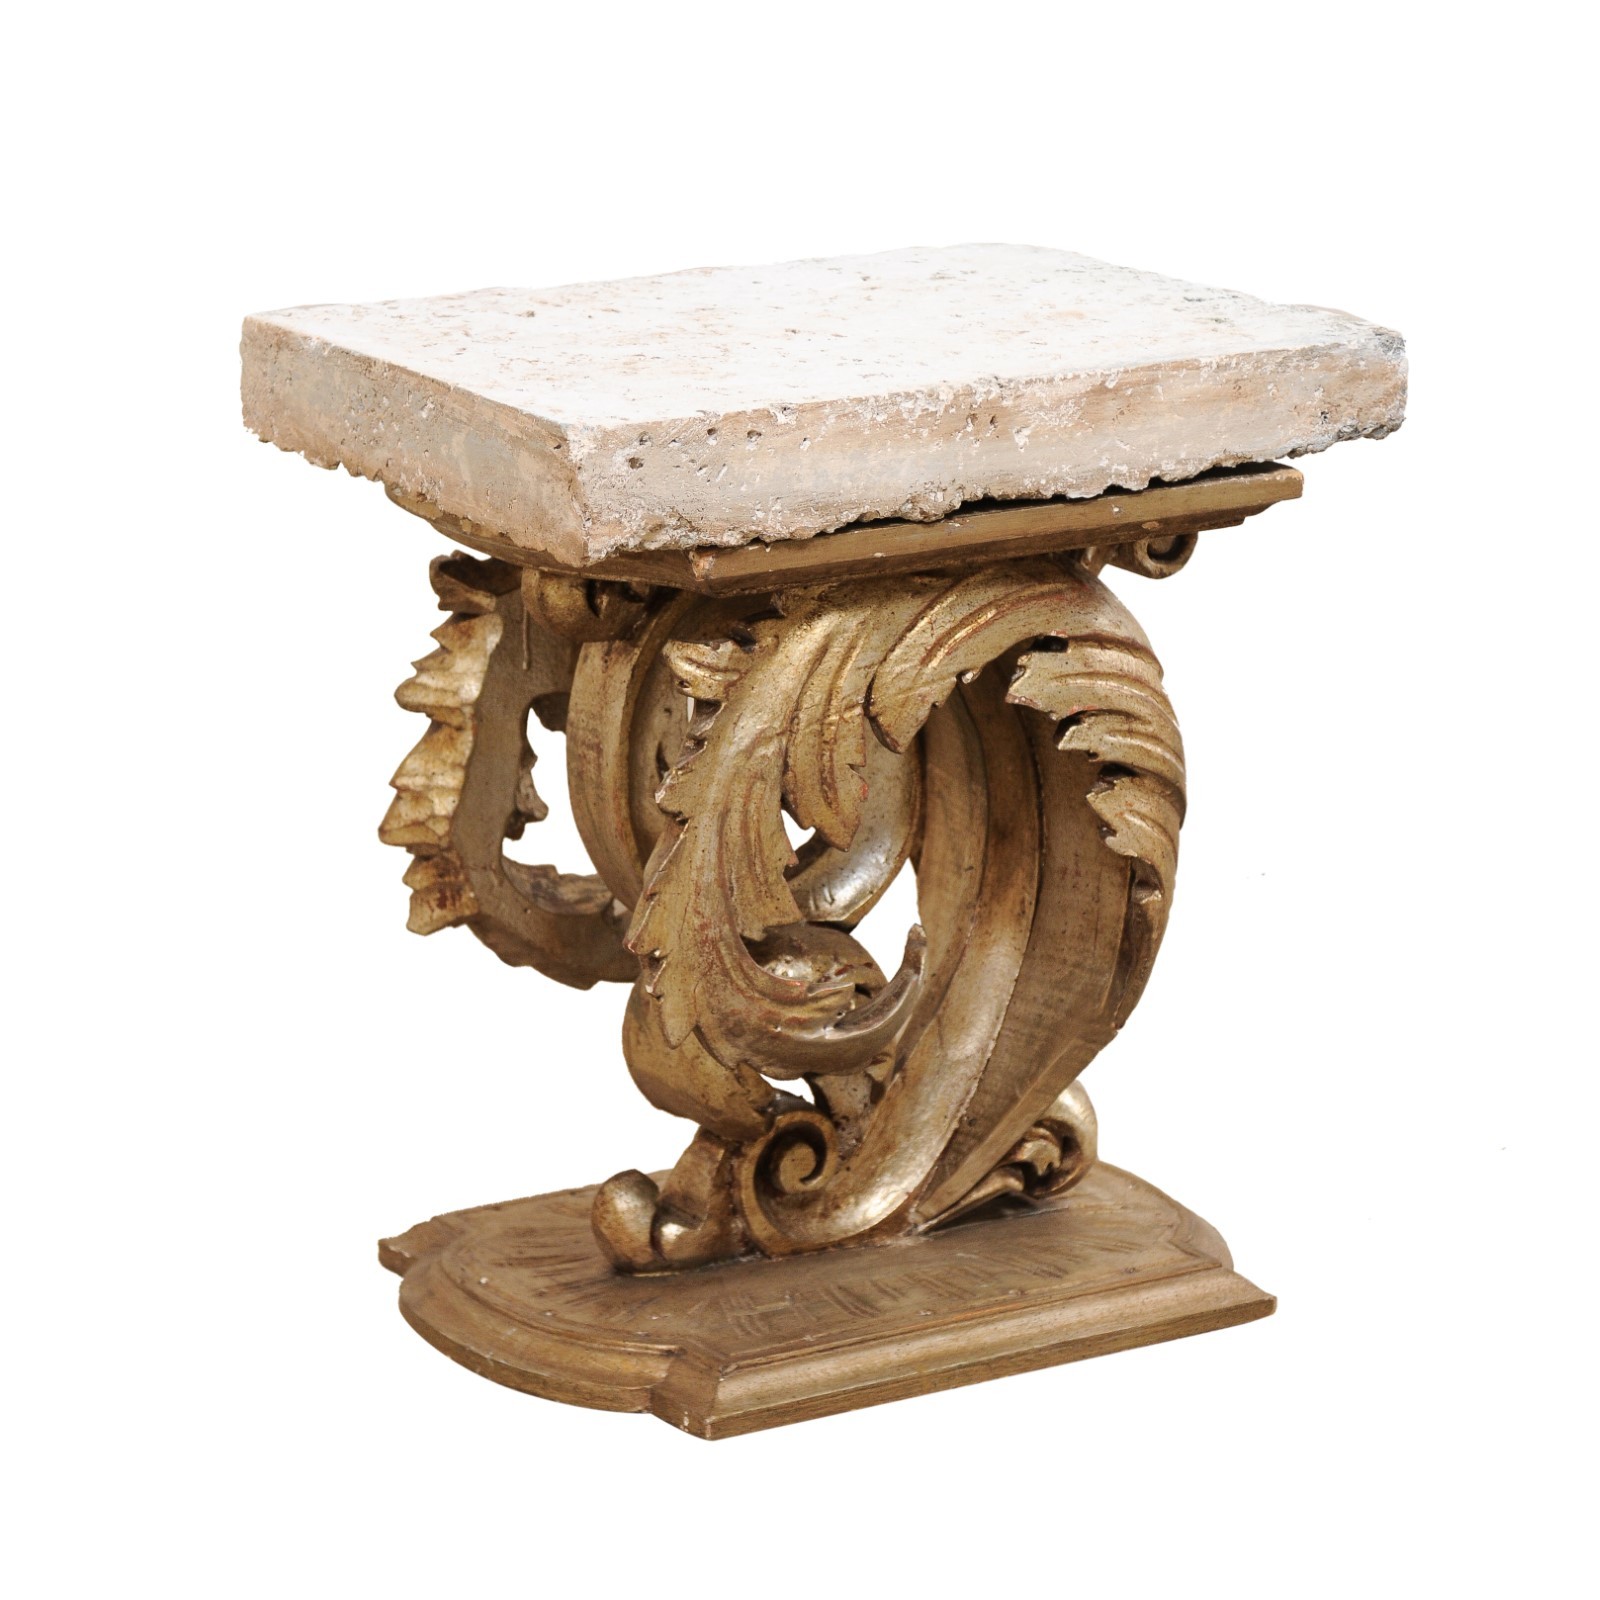 Scrolling Acanthus & Fossilized Coral Table